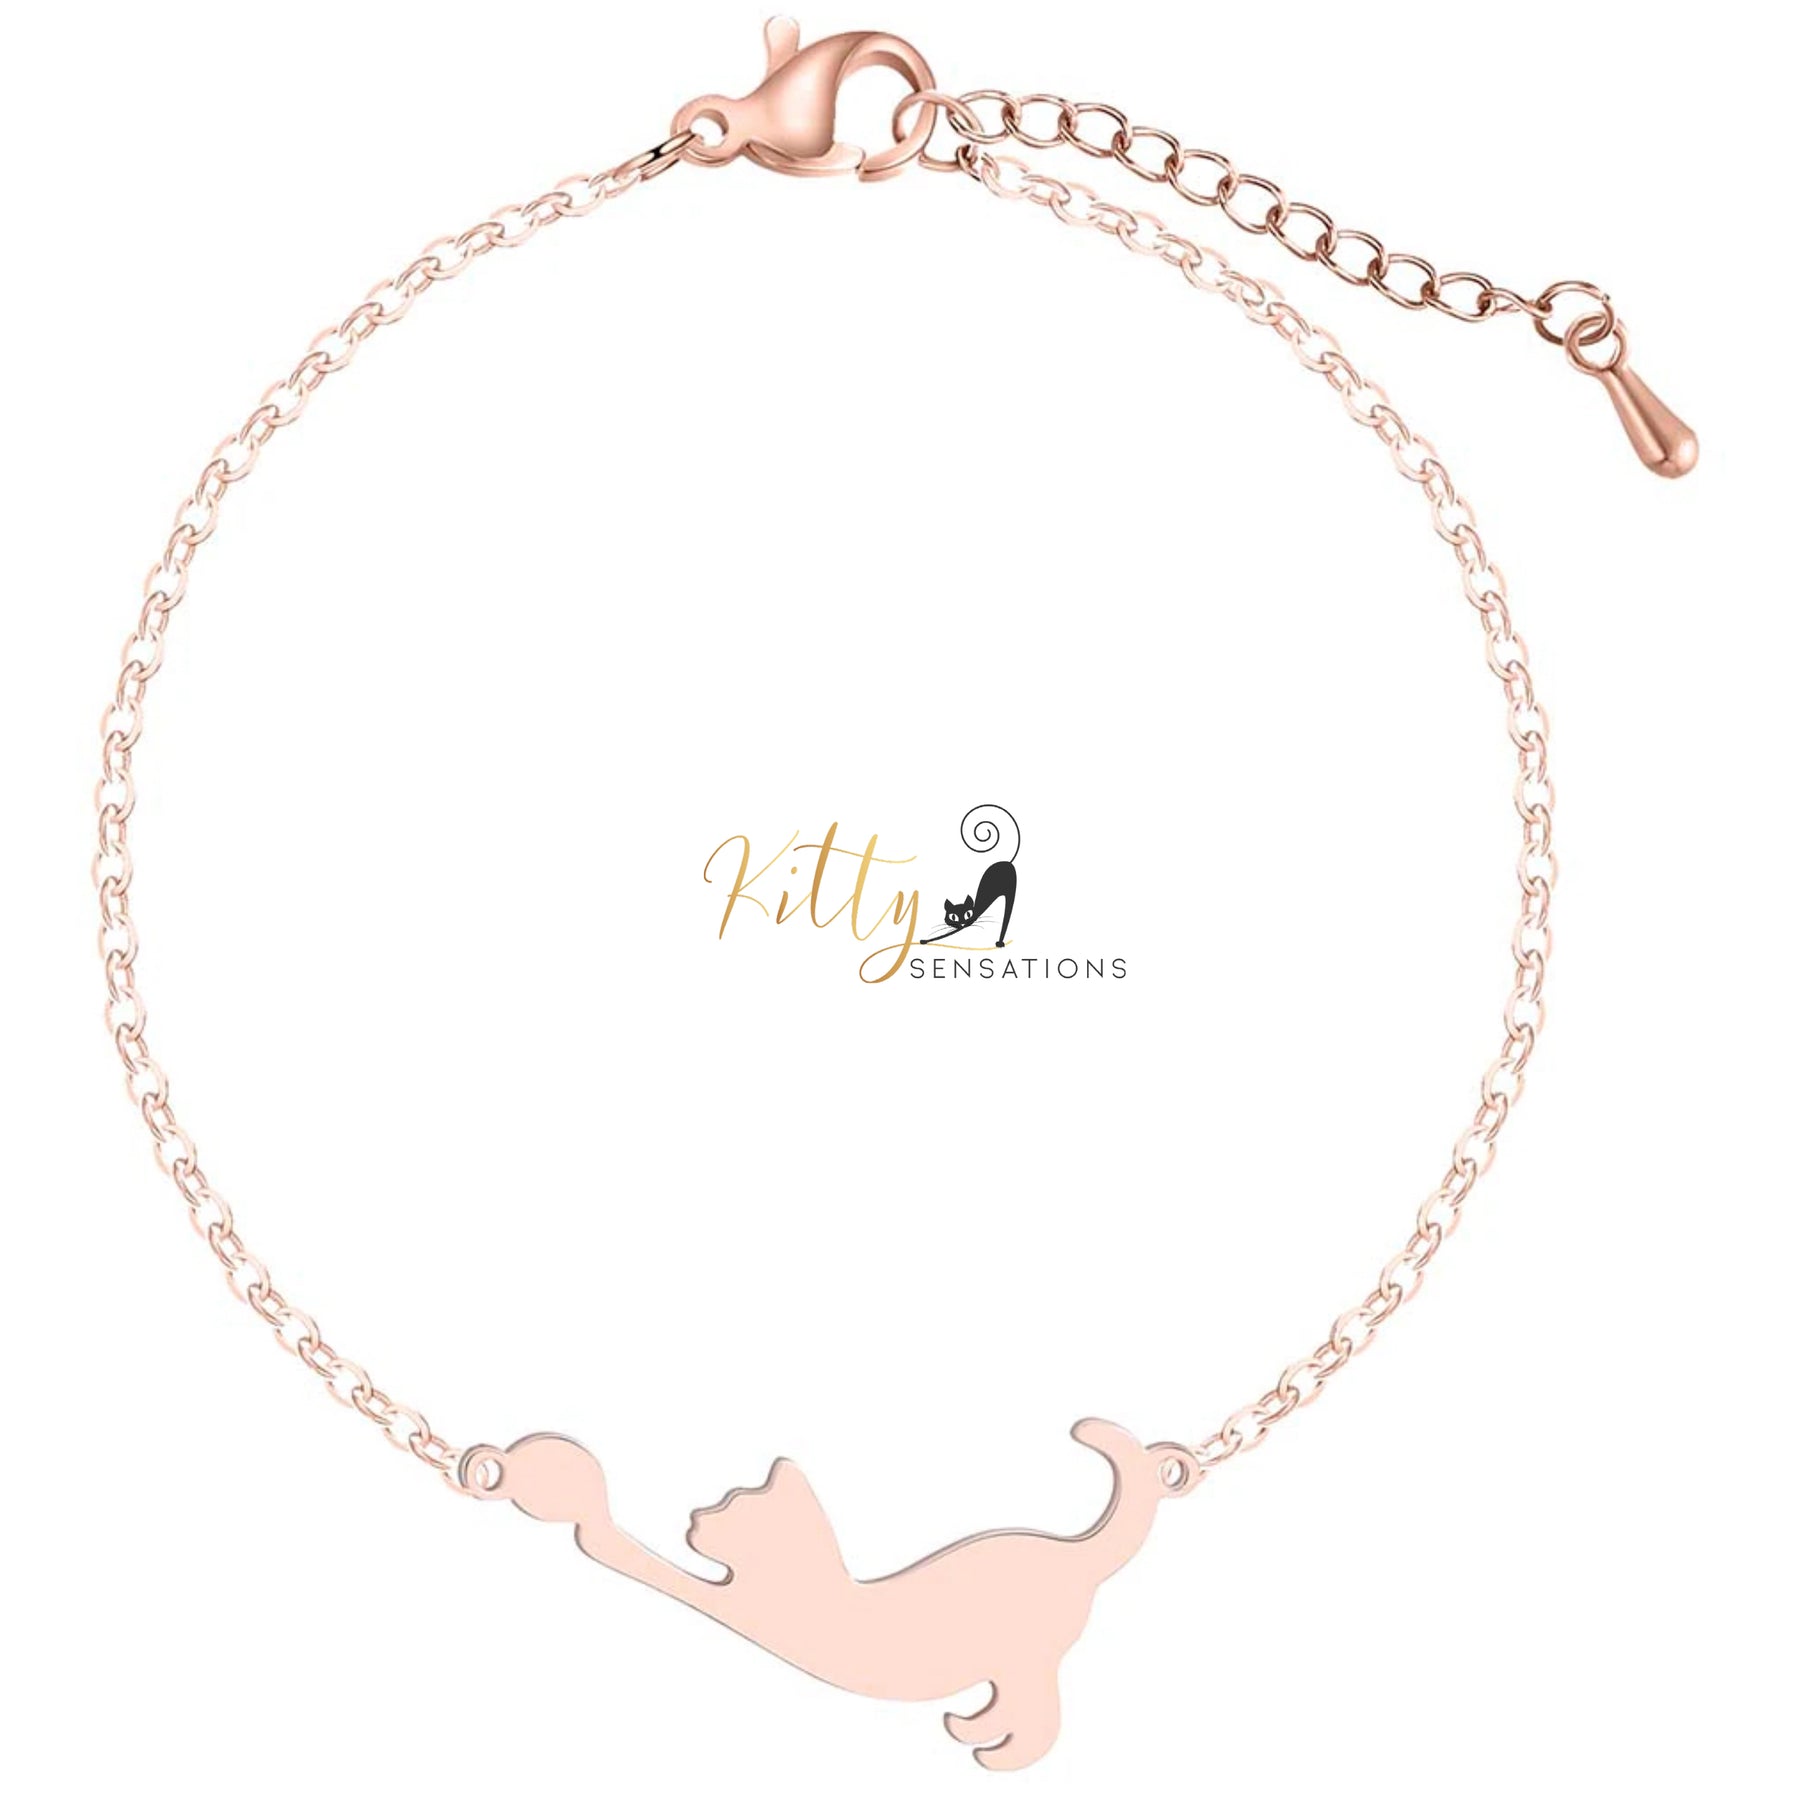 www.KittySensations.com: Stretching Cat Bracelet (Rose Gold, Silver, or Gold) ($21.16): https://www.kittysensations.com/products/stretching-cat-bracelet-silver-rose-gold-or-gold